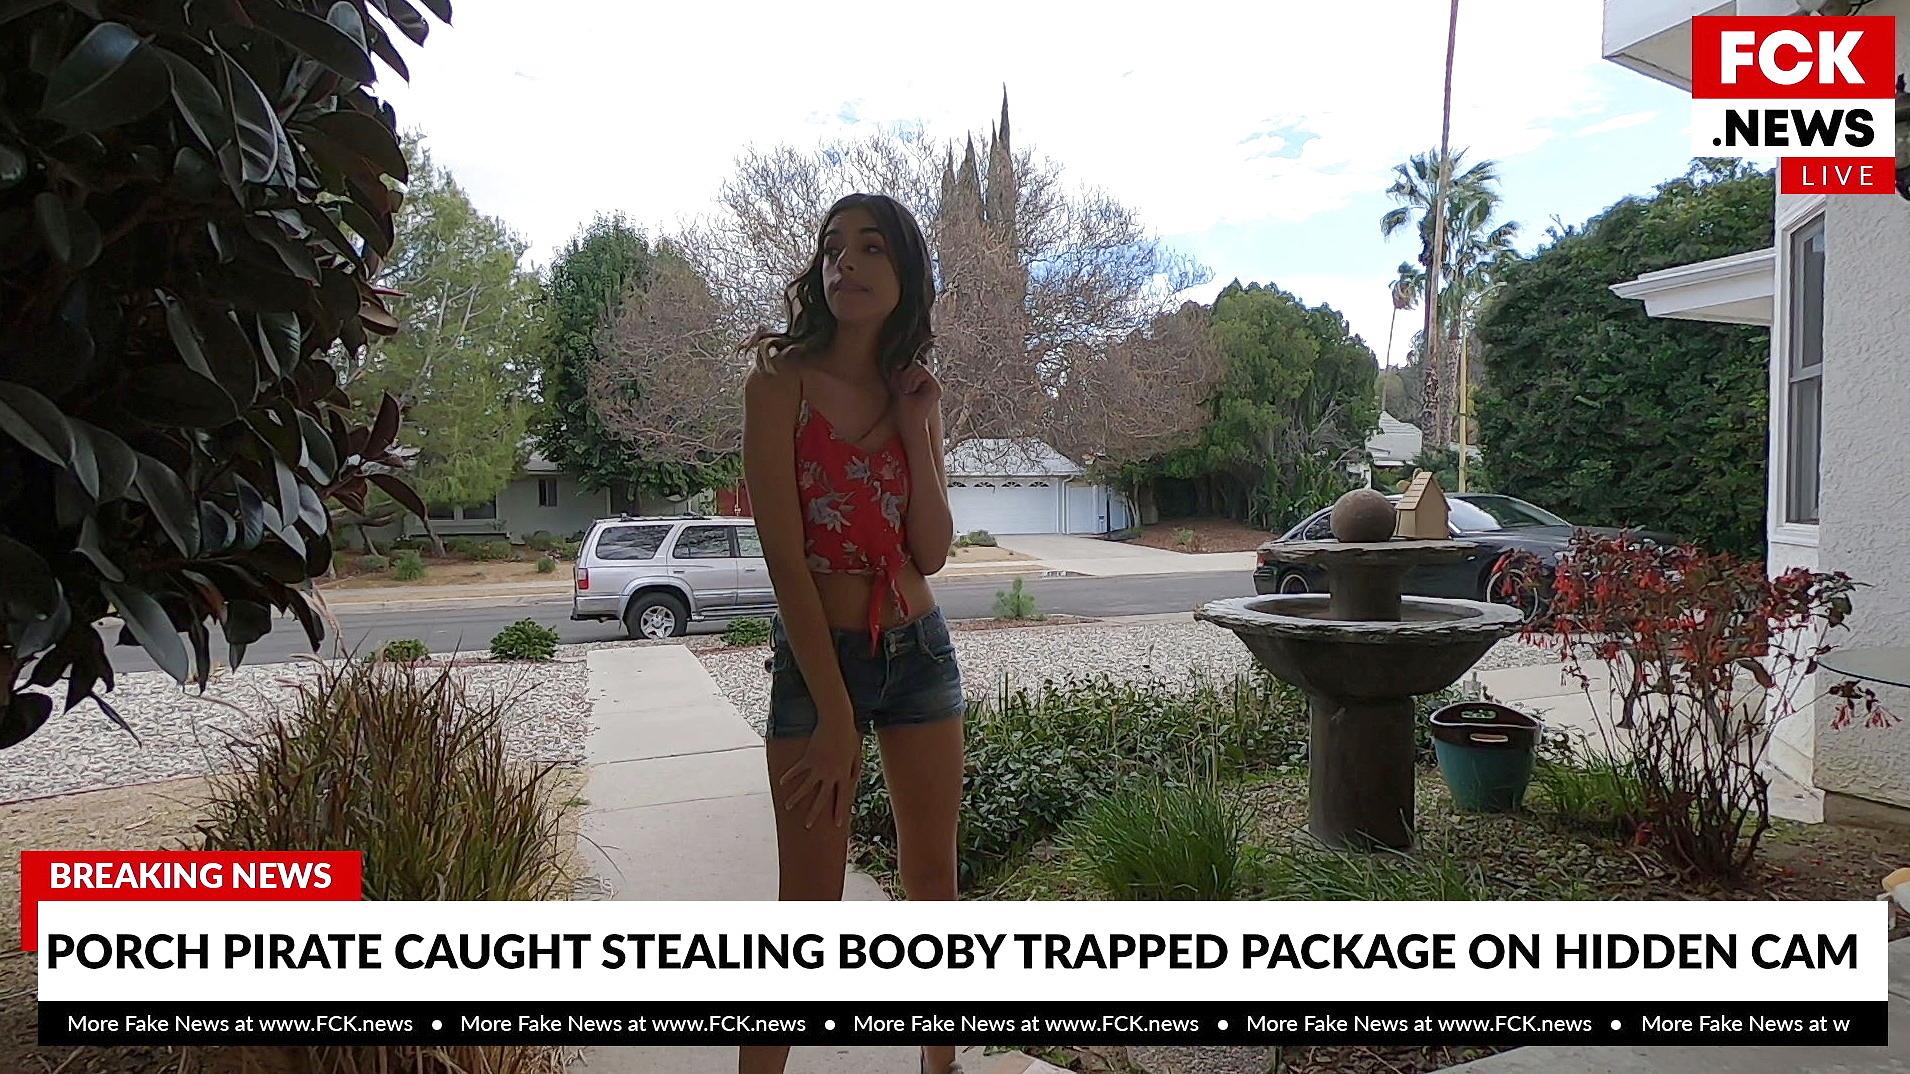 Harmony Wonder is a porch pirate that gets caught red handed! bang